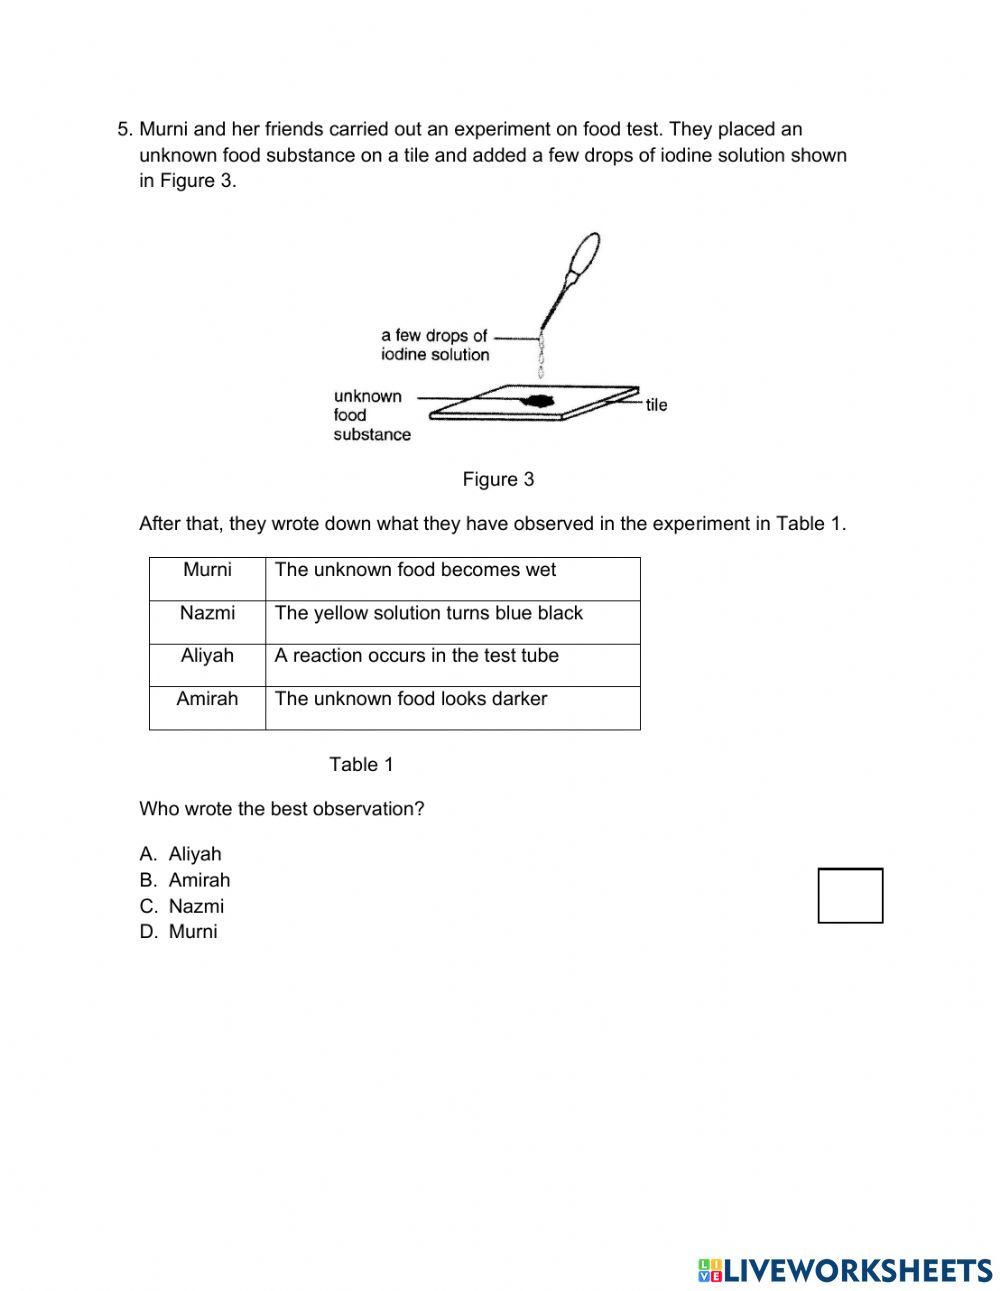 Year 8 online examination (question 1 to 10)